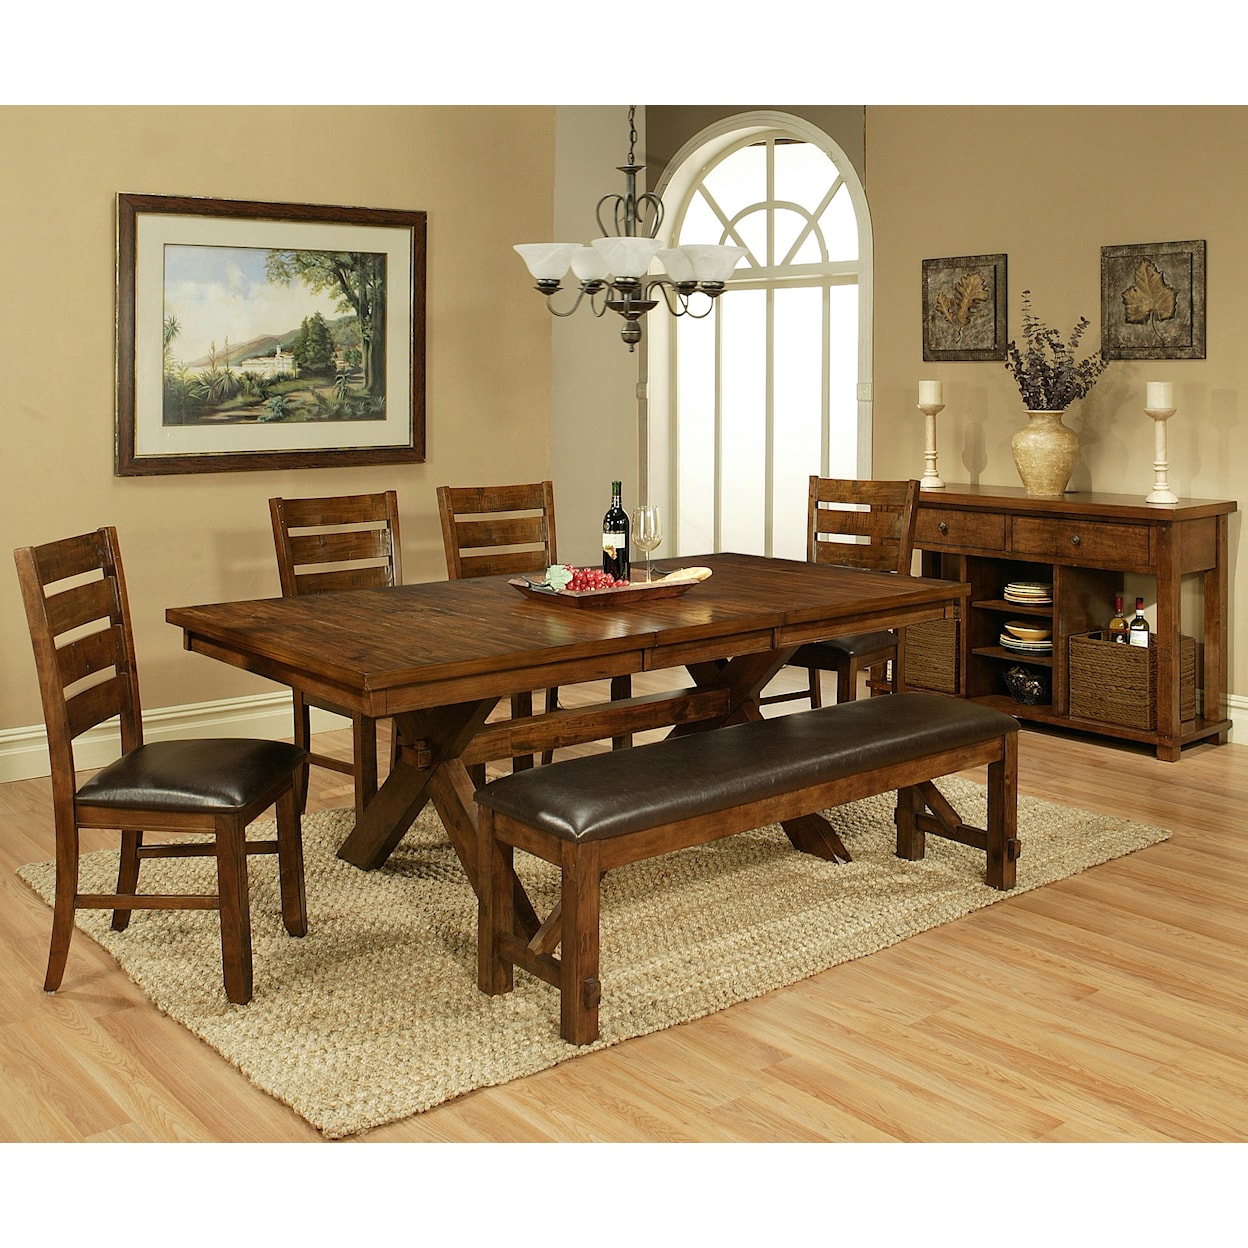 APA by Whalen Vineyard 6 Piece Table and Chair Set